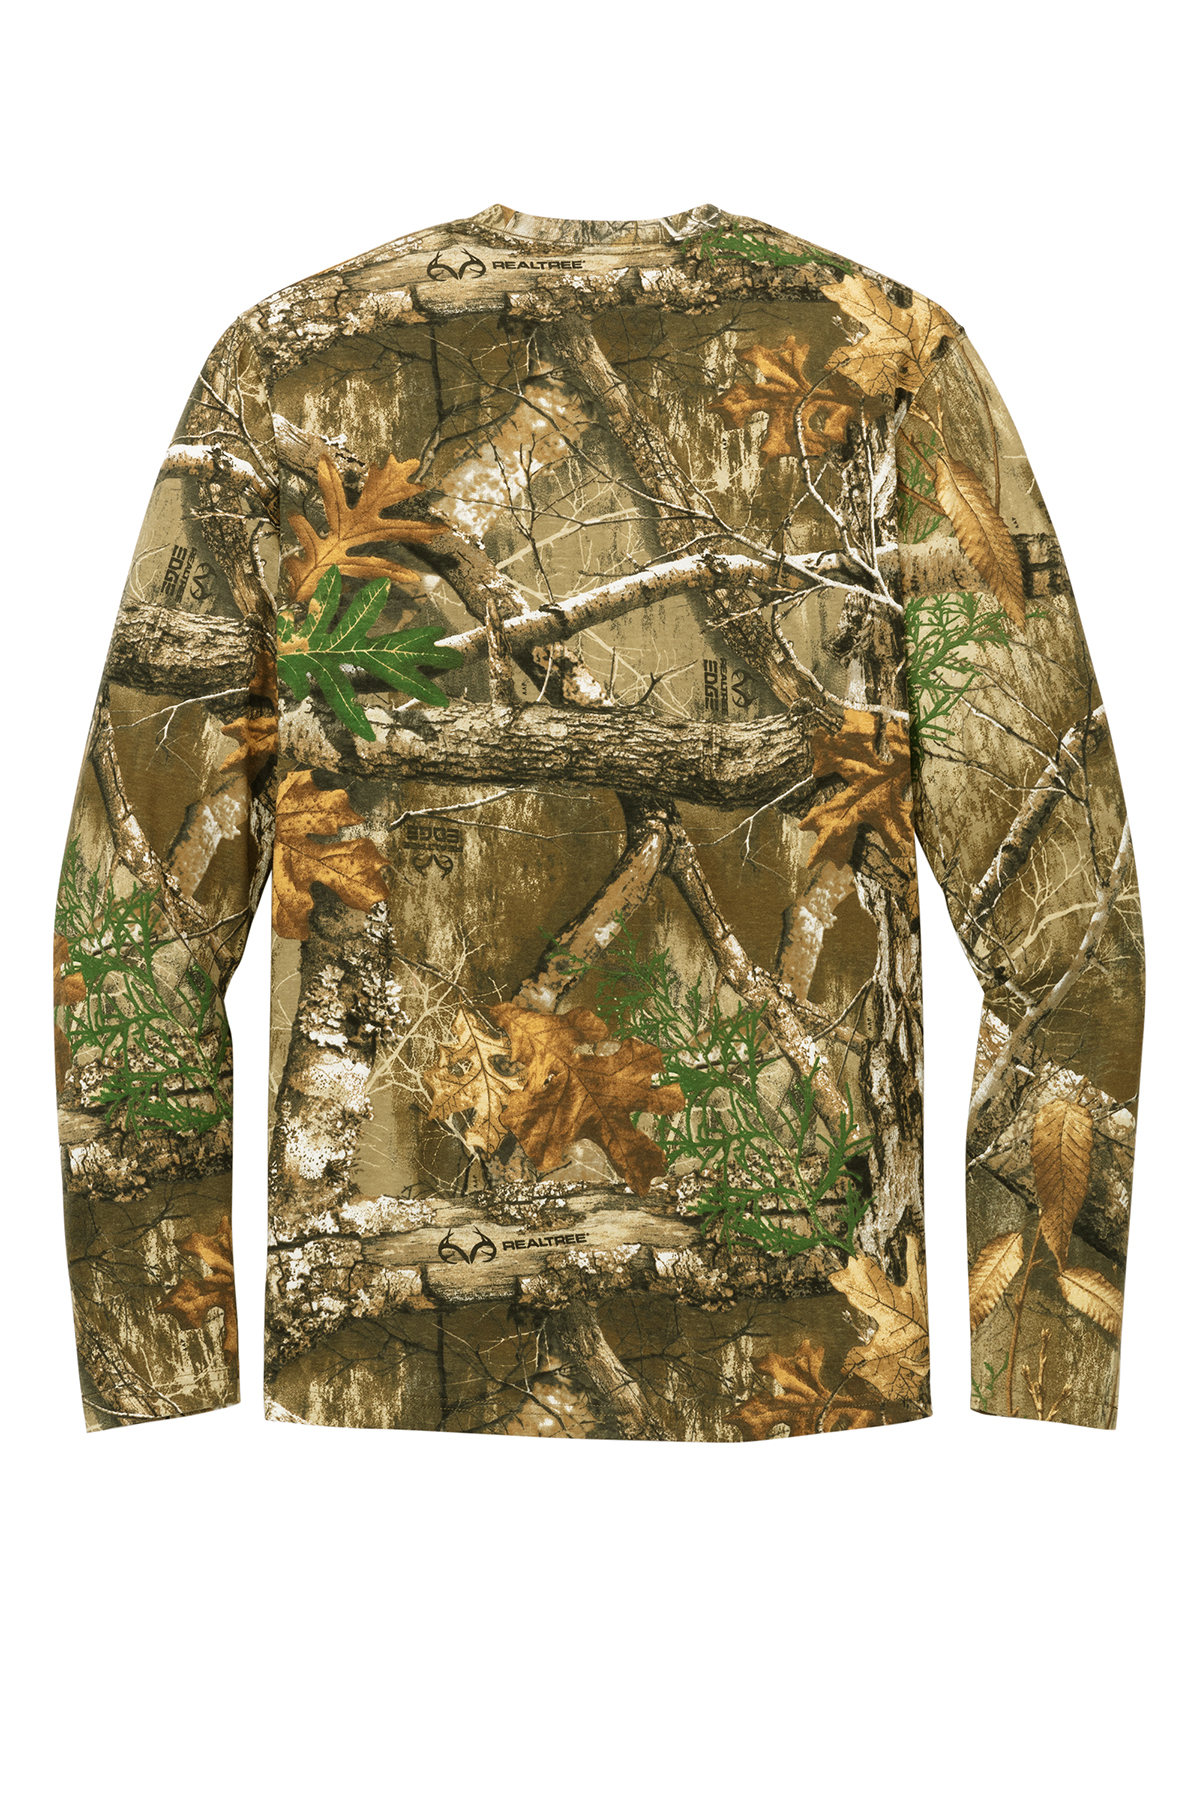 Russell Outdoors Realtree Long Sleeve Pocket Tee | Product | SanMar